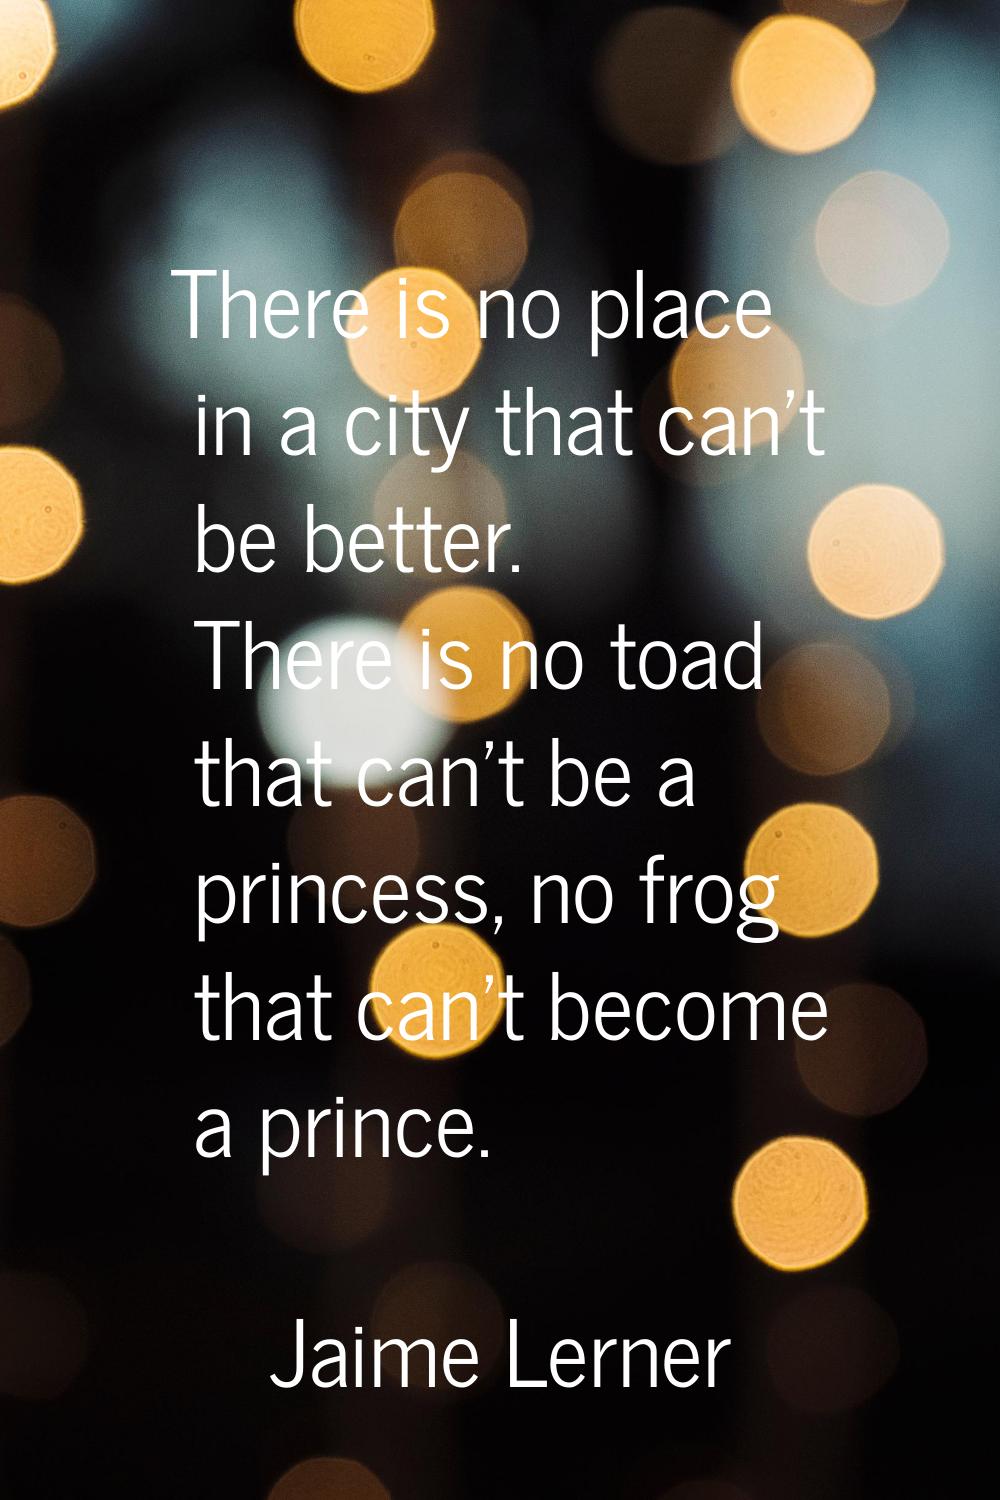 There is no place in a city that can't be better. There is no toad that can't be a princess, no fro